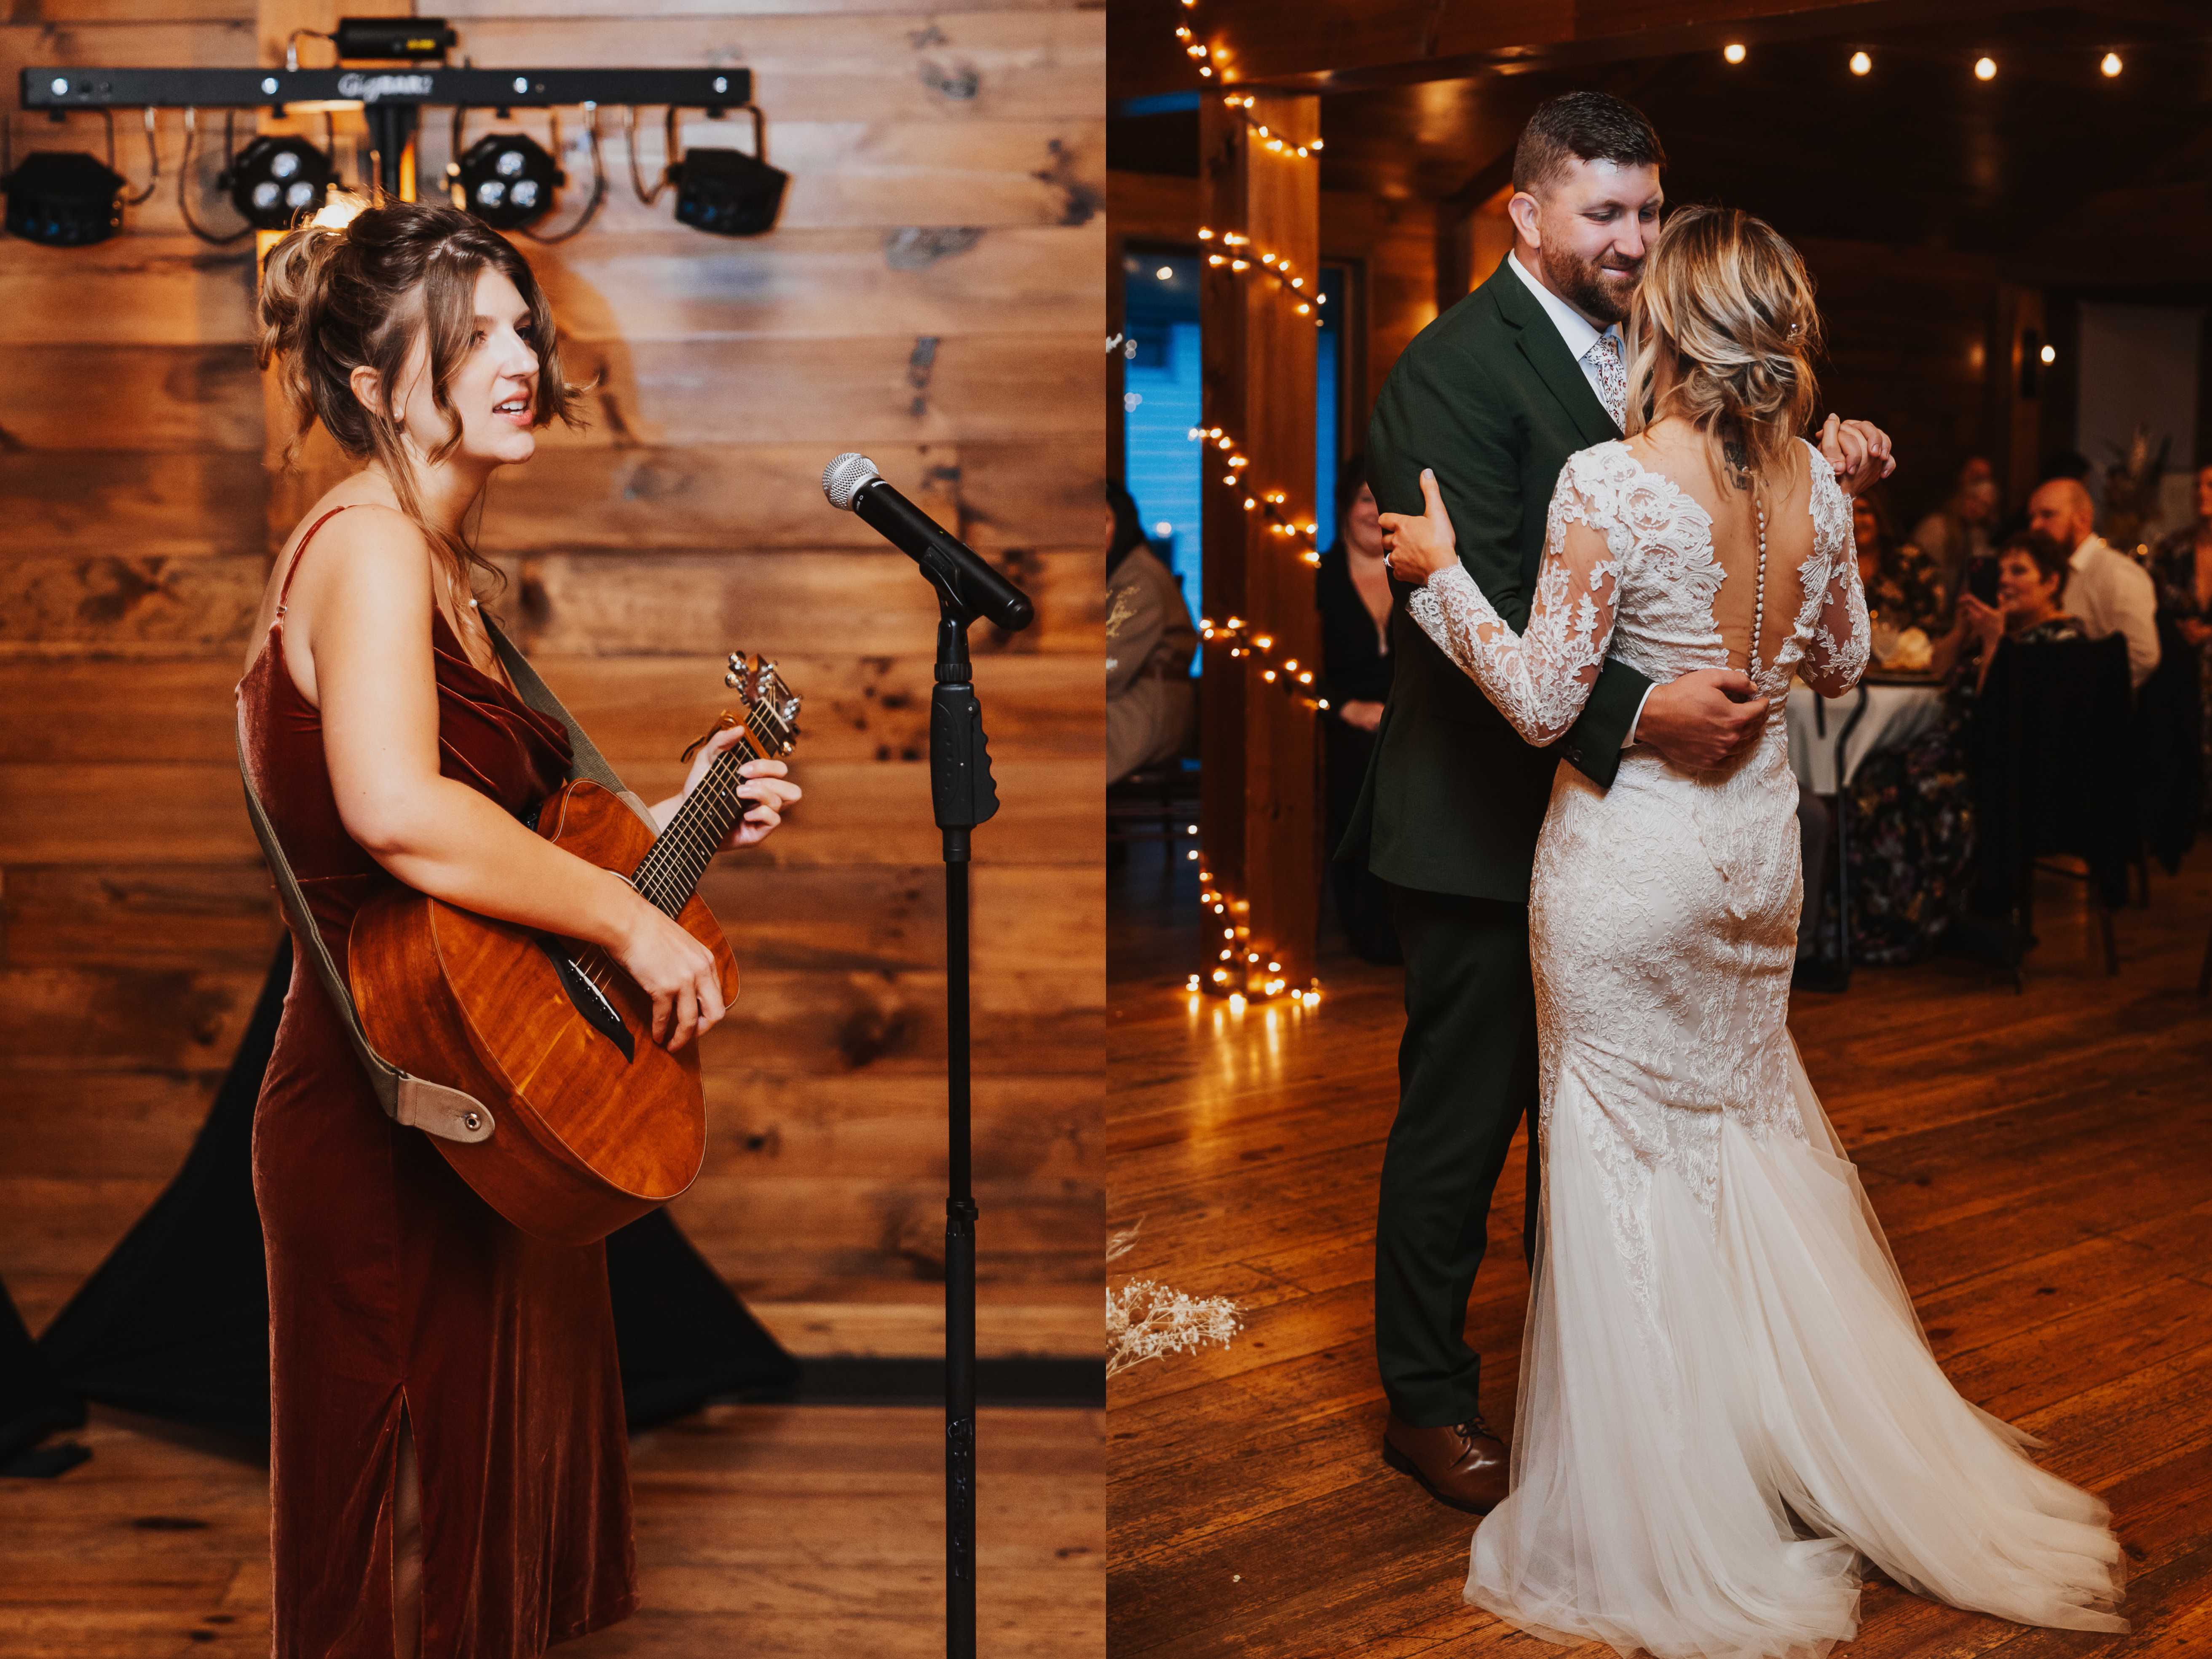 2 photos side by side, the left is of a woman singing while playing an acoustic guitar, the right is of a bride and groom dancing to the music as guests watch